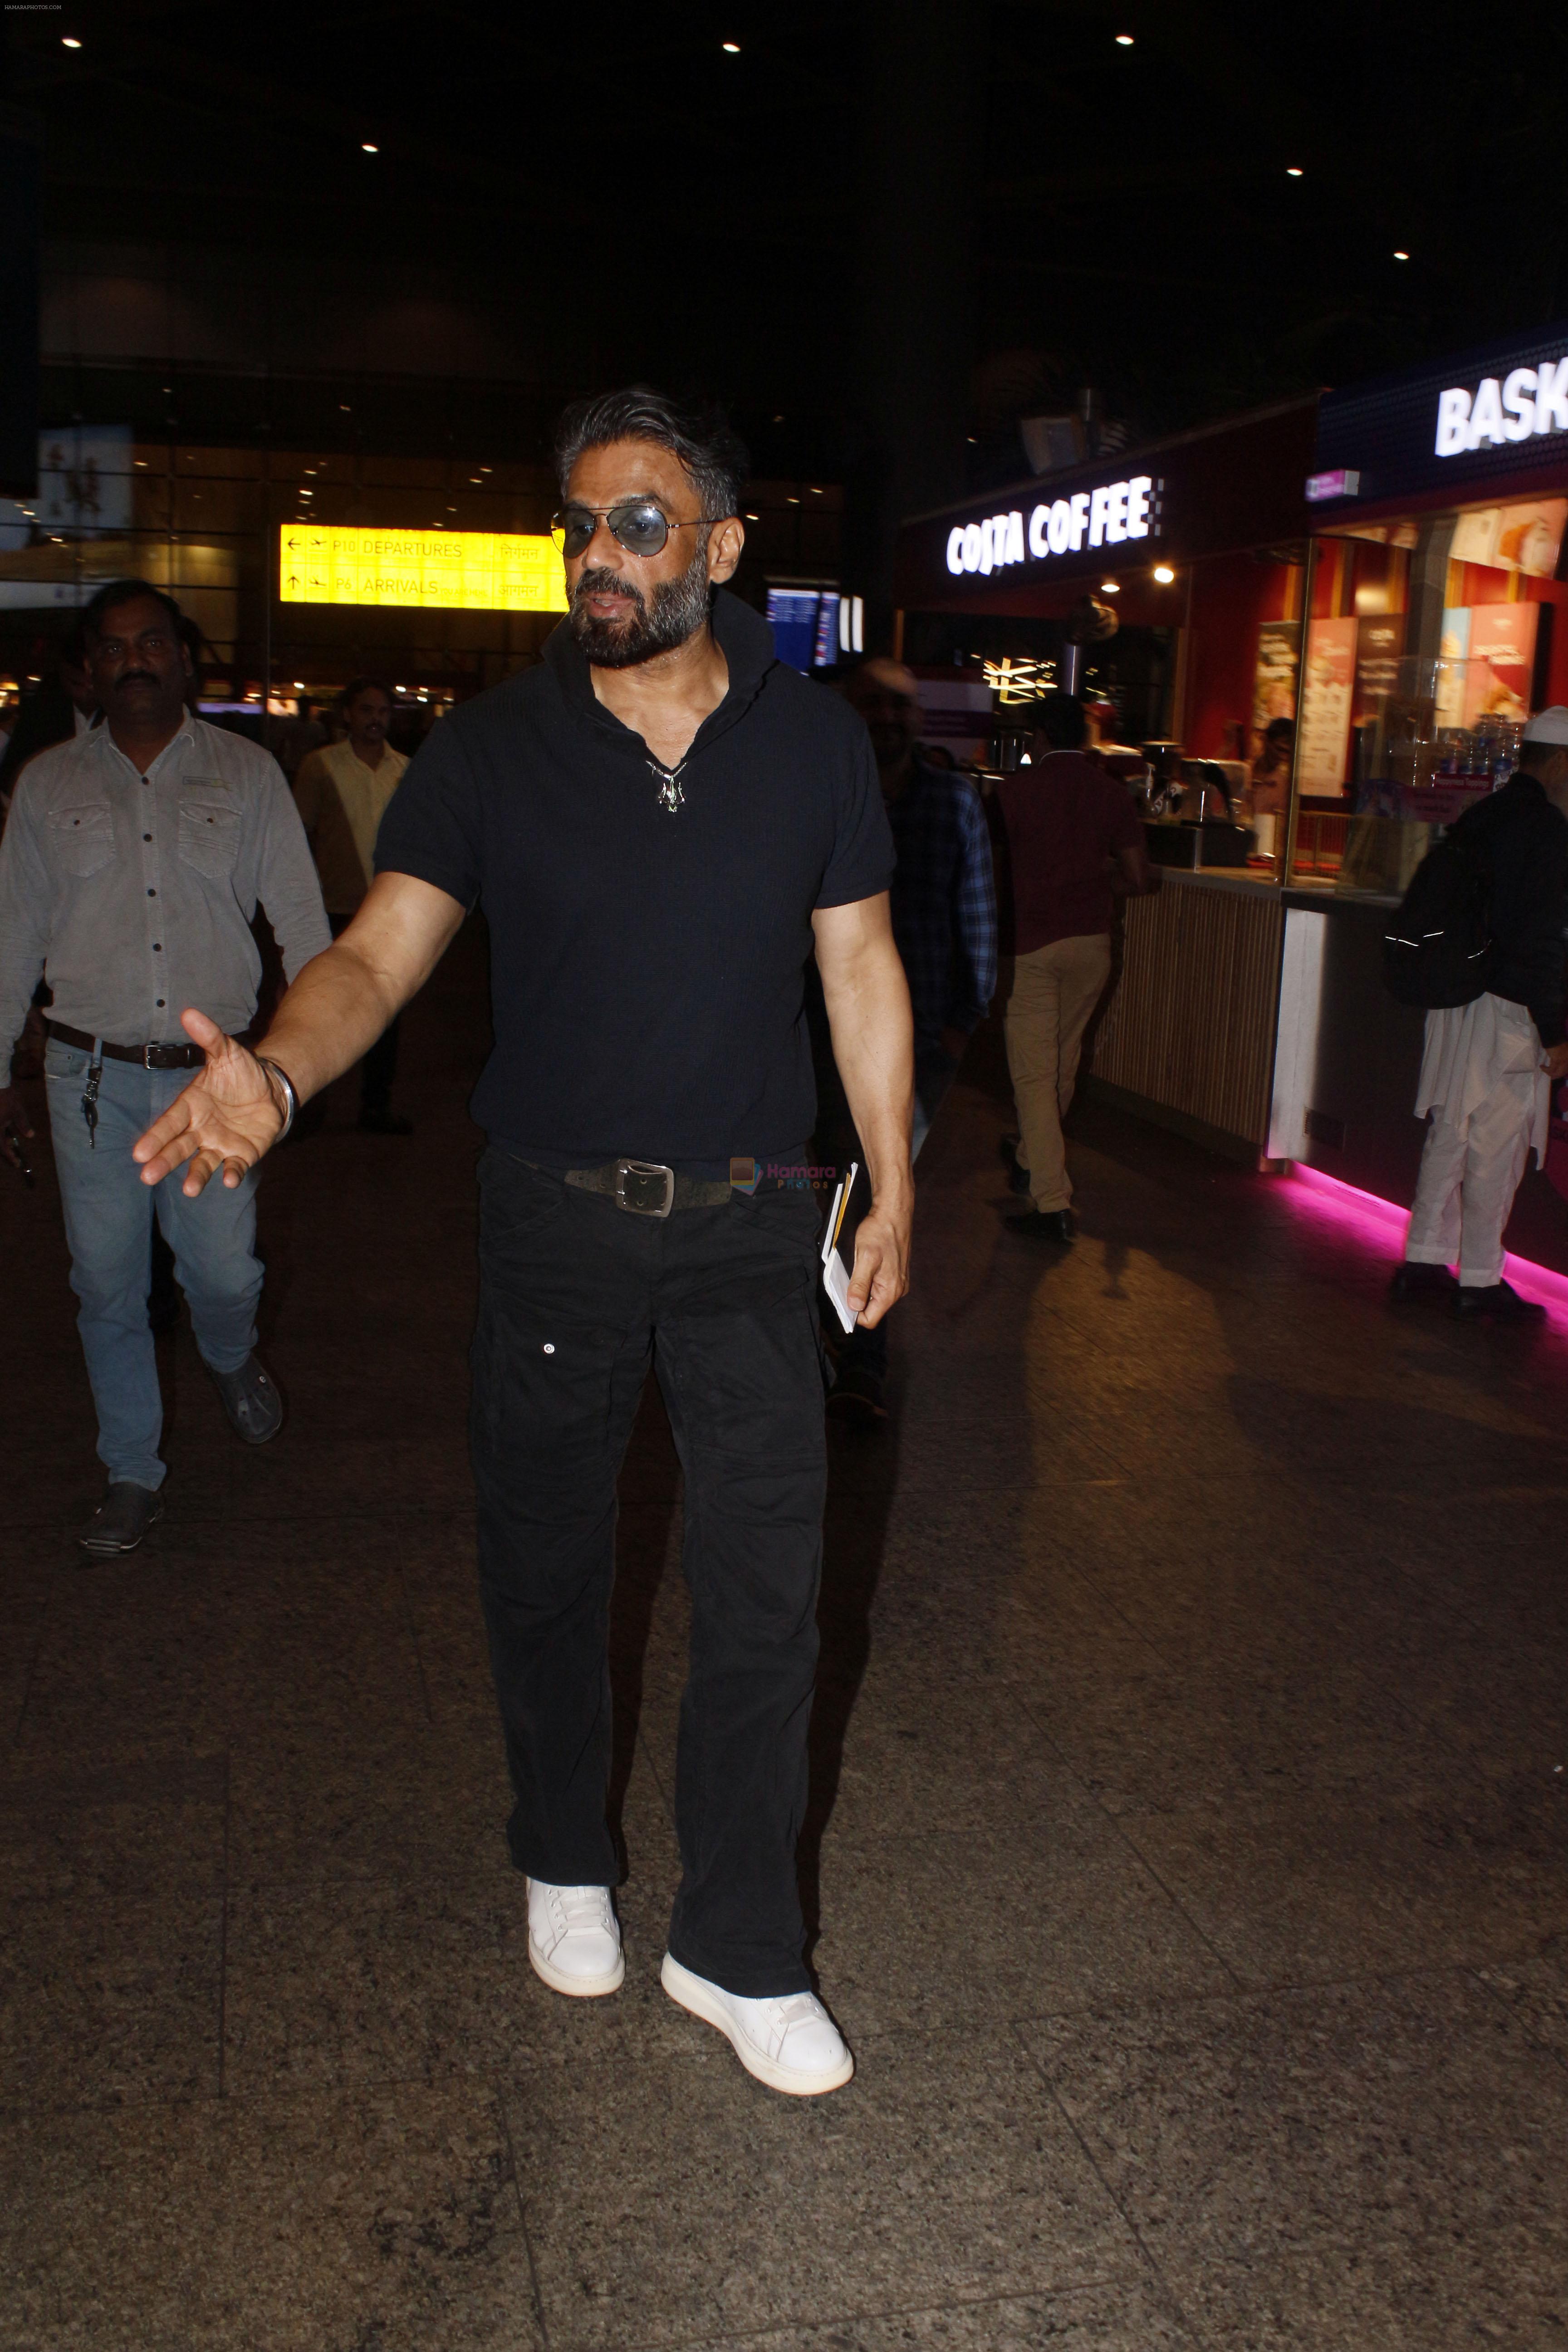 Suniel Shetty seen at the airport on 6 July 2023